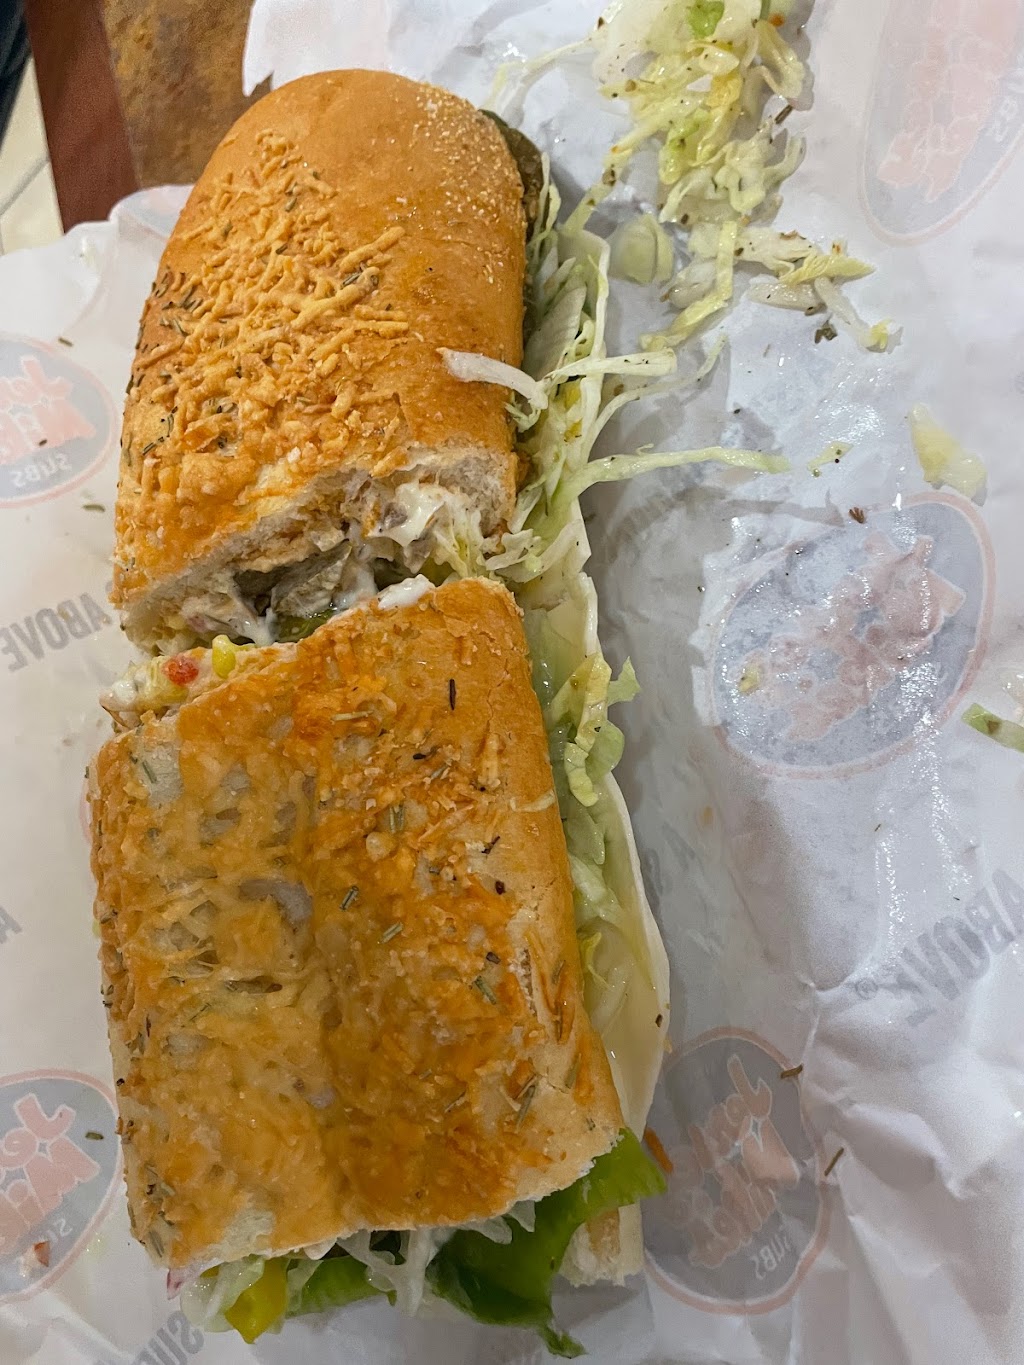 Jersey Mikes Subs | 1322 Centennial Ave Unit 6, Piscataway, NJ 08854, USA | Phone: (732) 624-9143